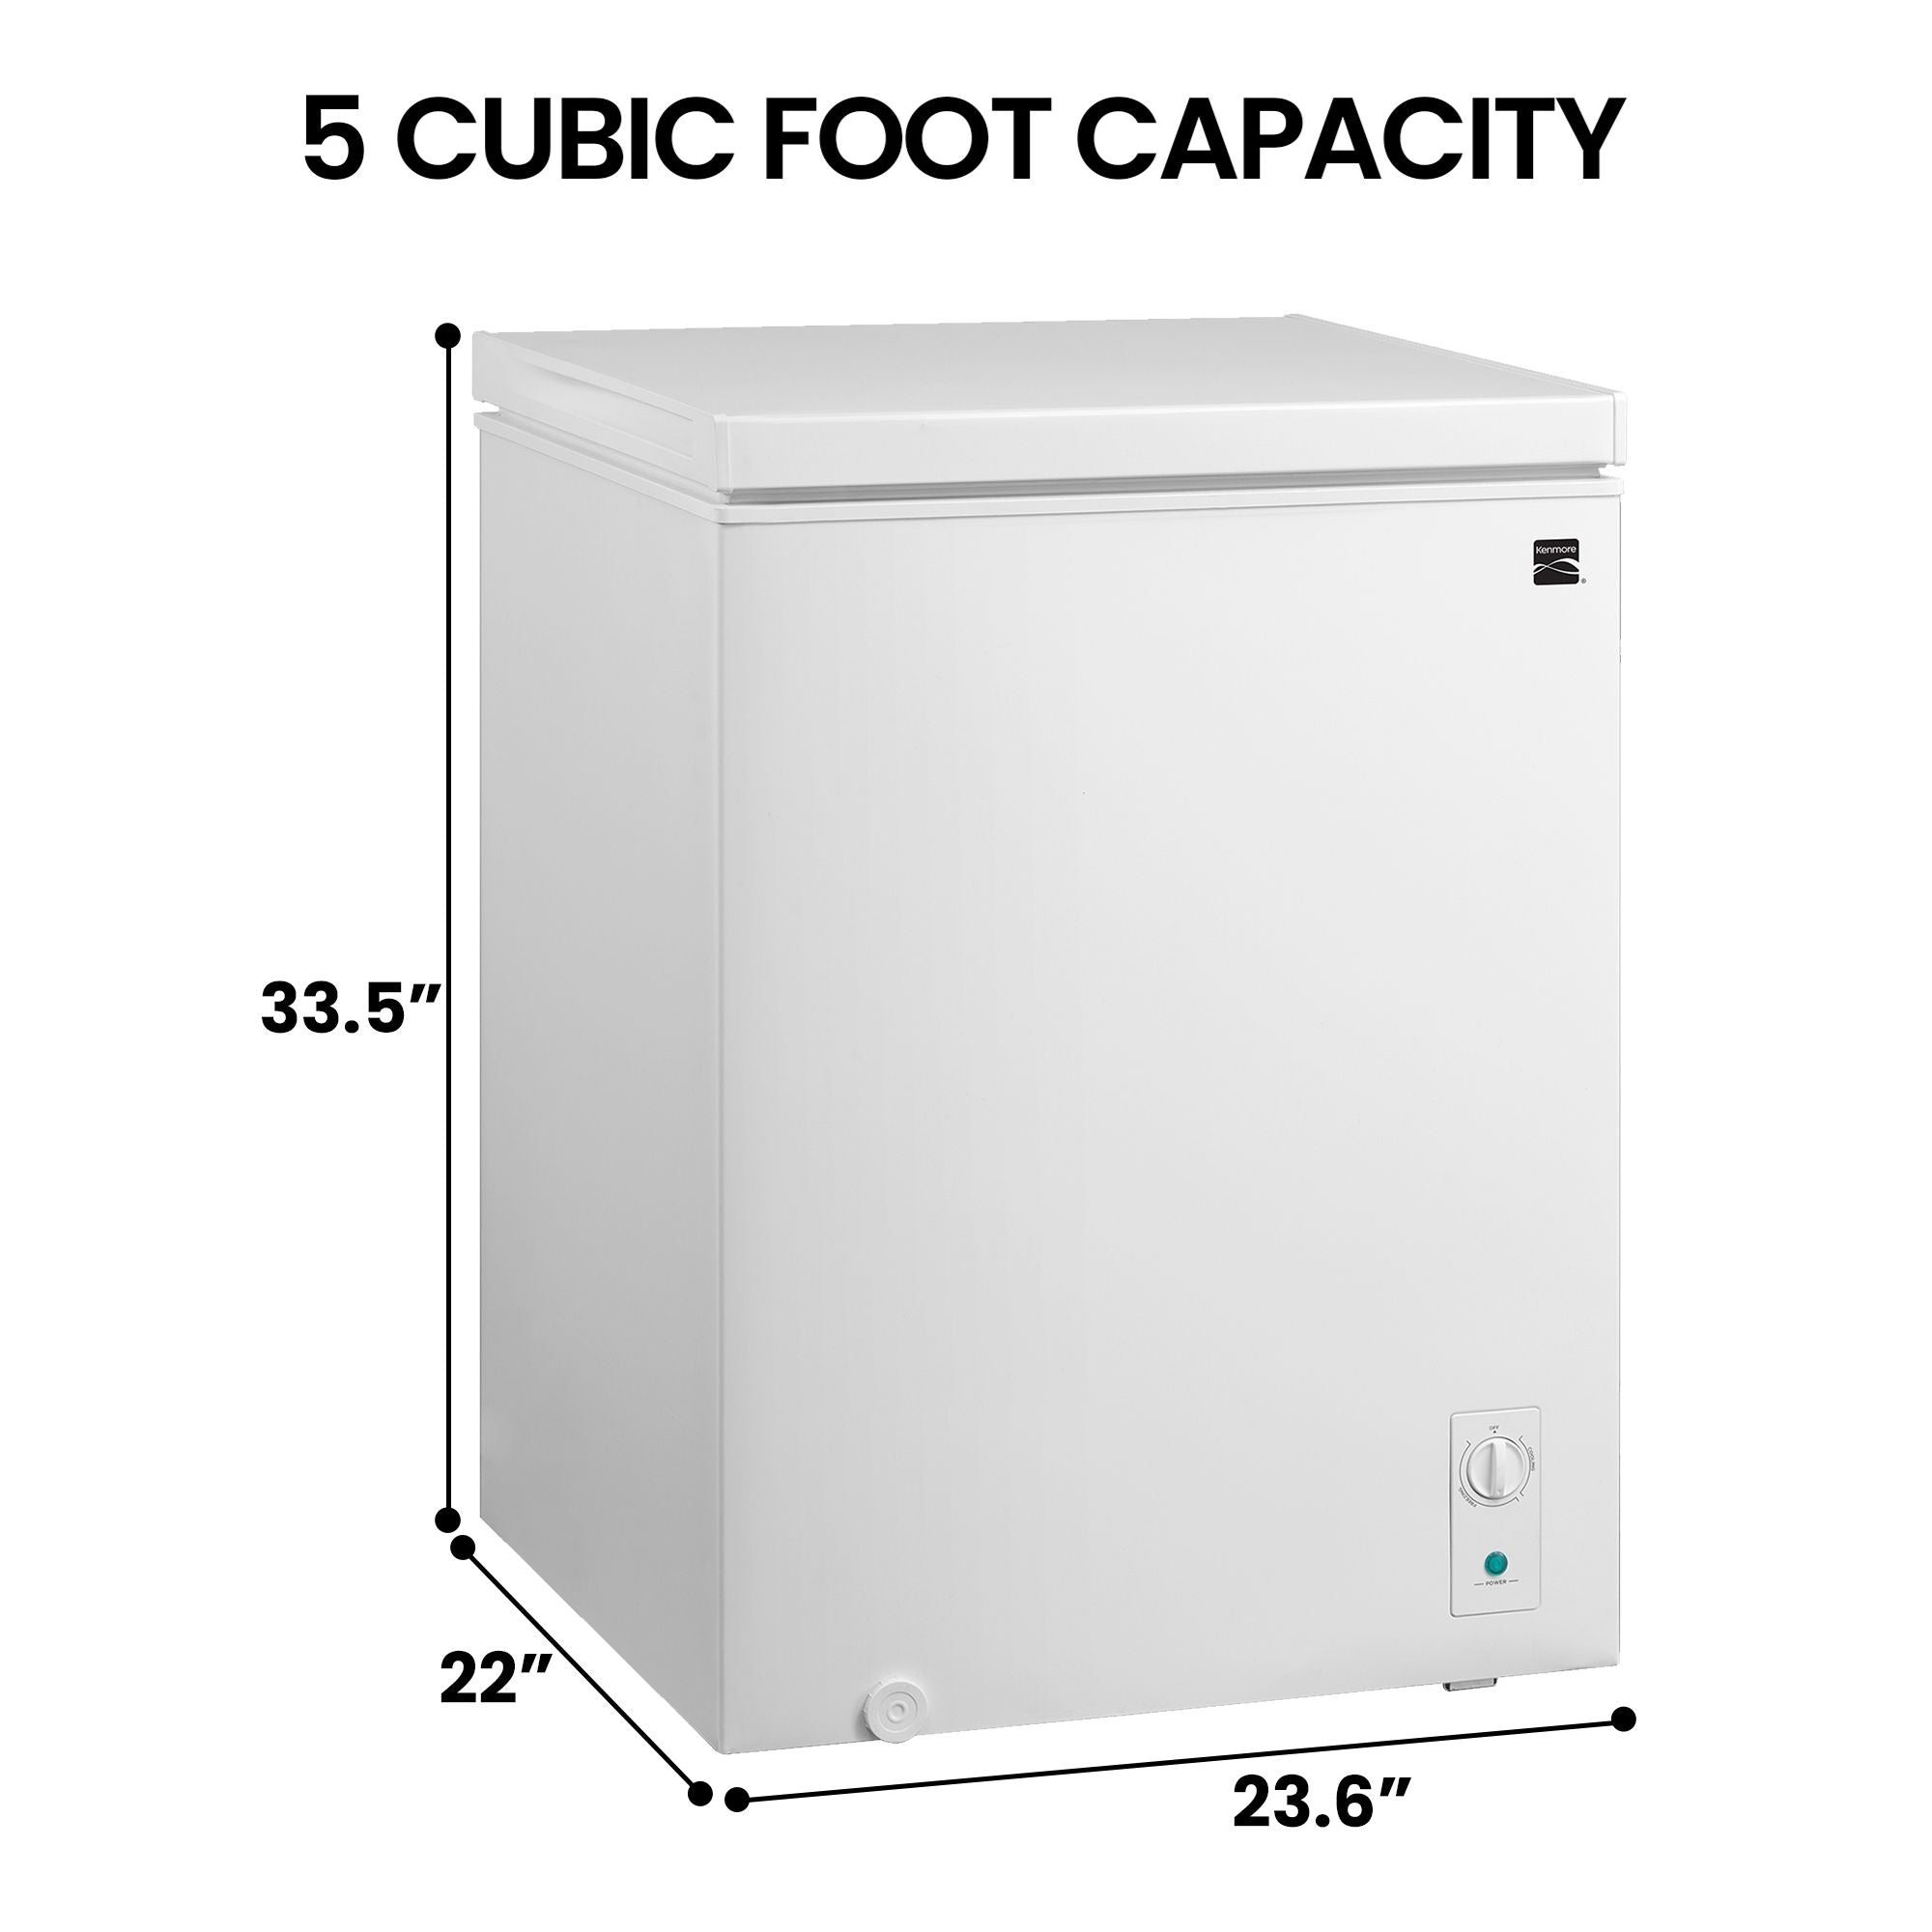 Kenmore convertible chest freezer on a white background with dimensions labeled and text above reading, "5 cubic foot capacity"